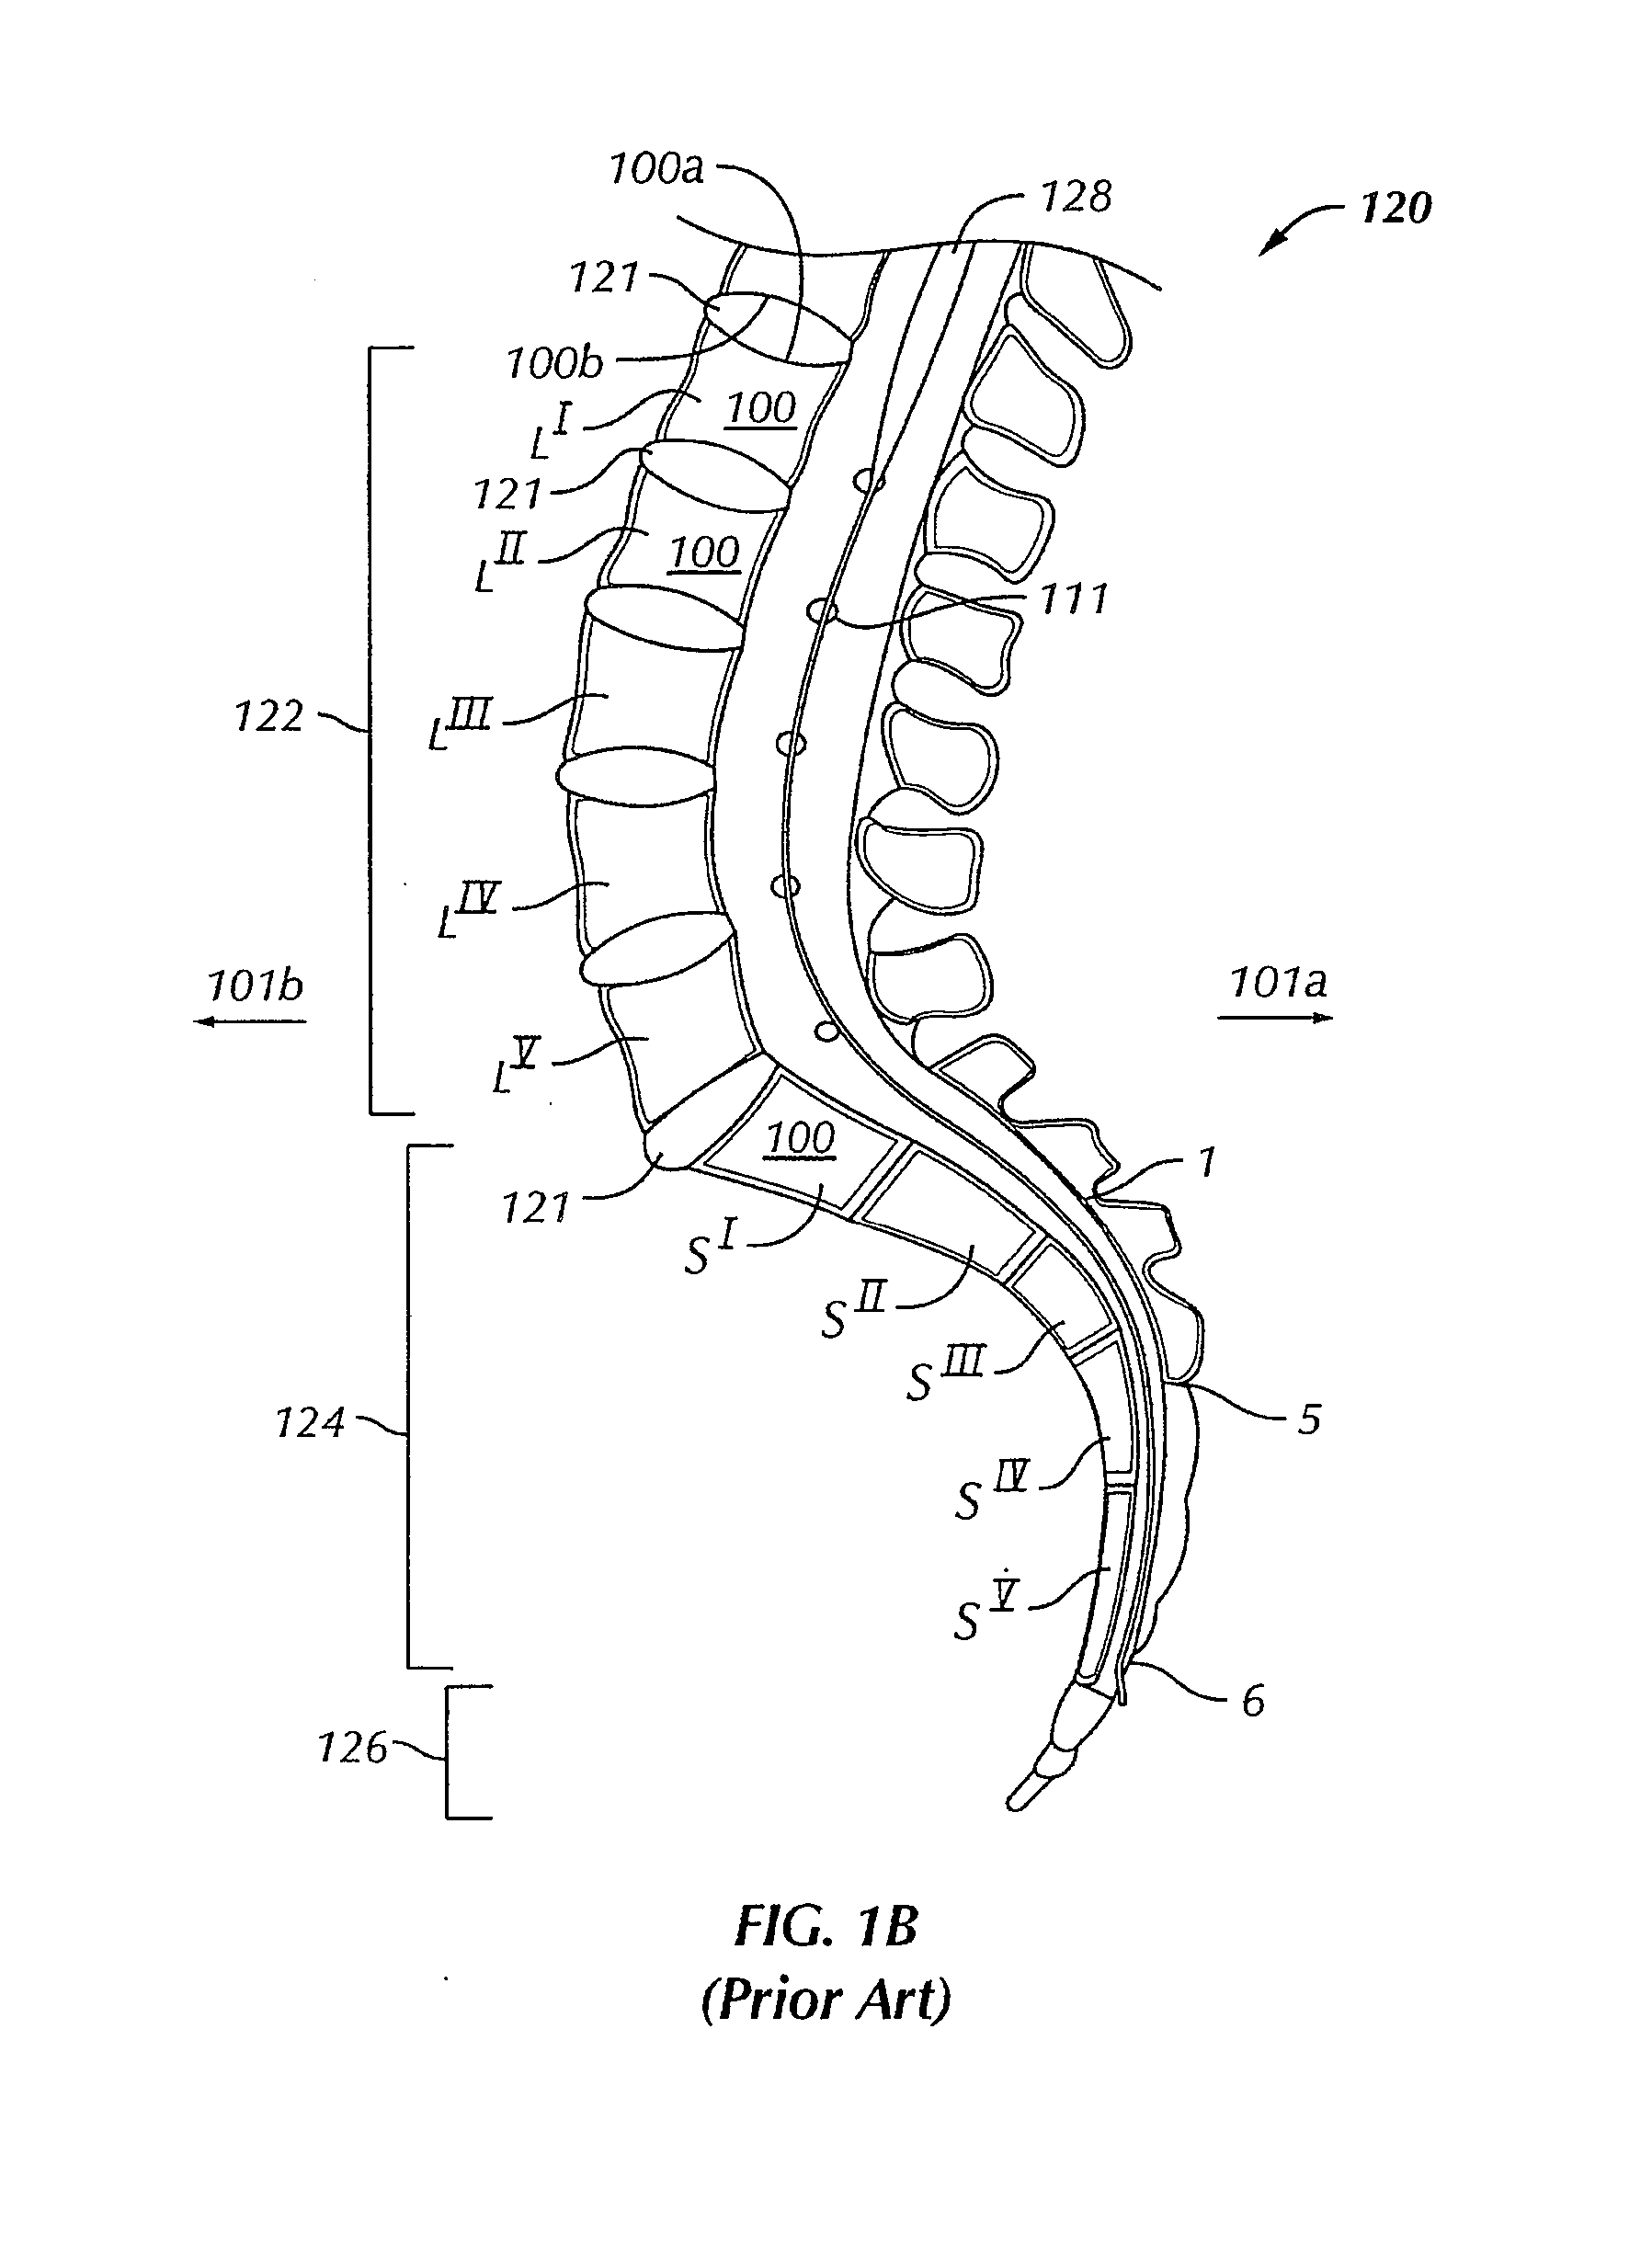 Internal fixation system for spine surgery